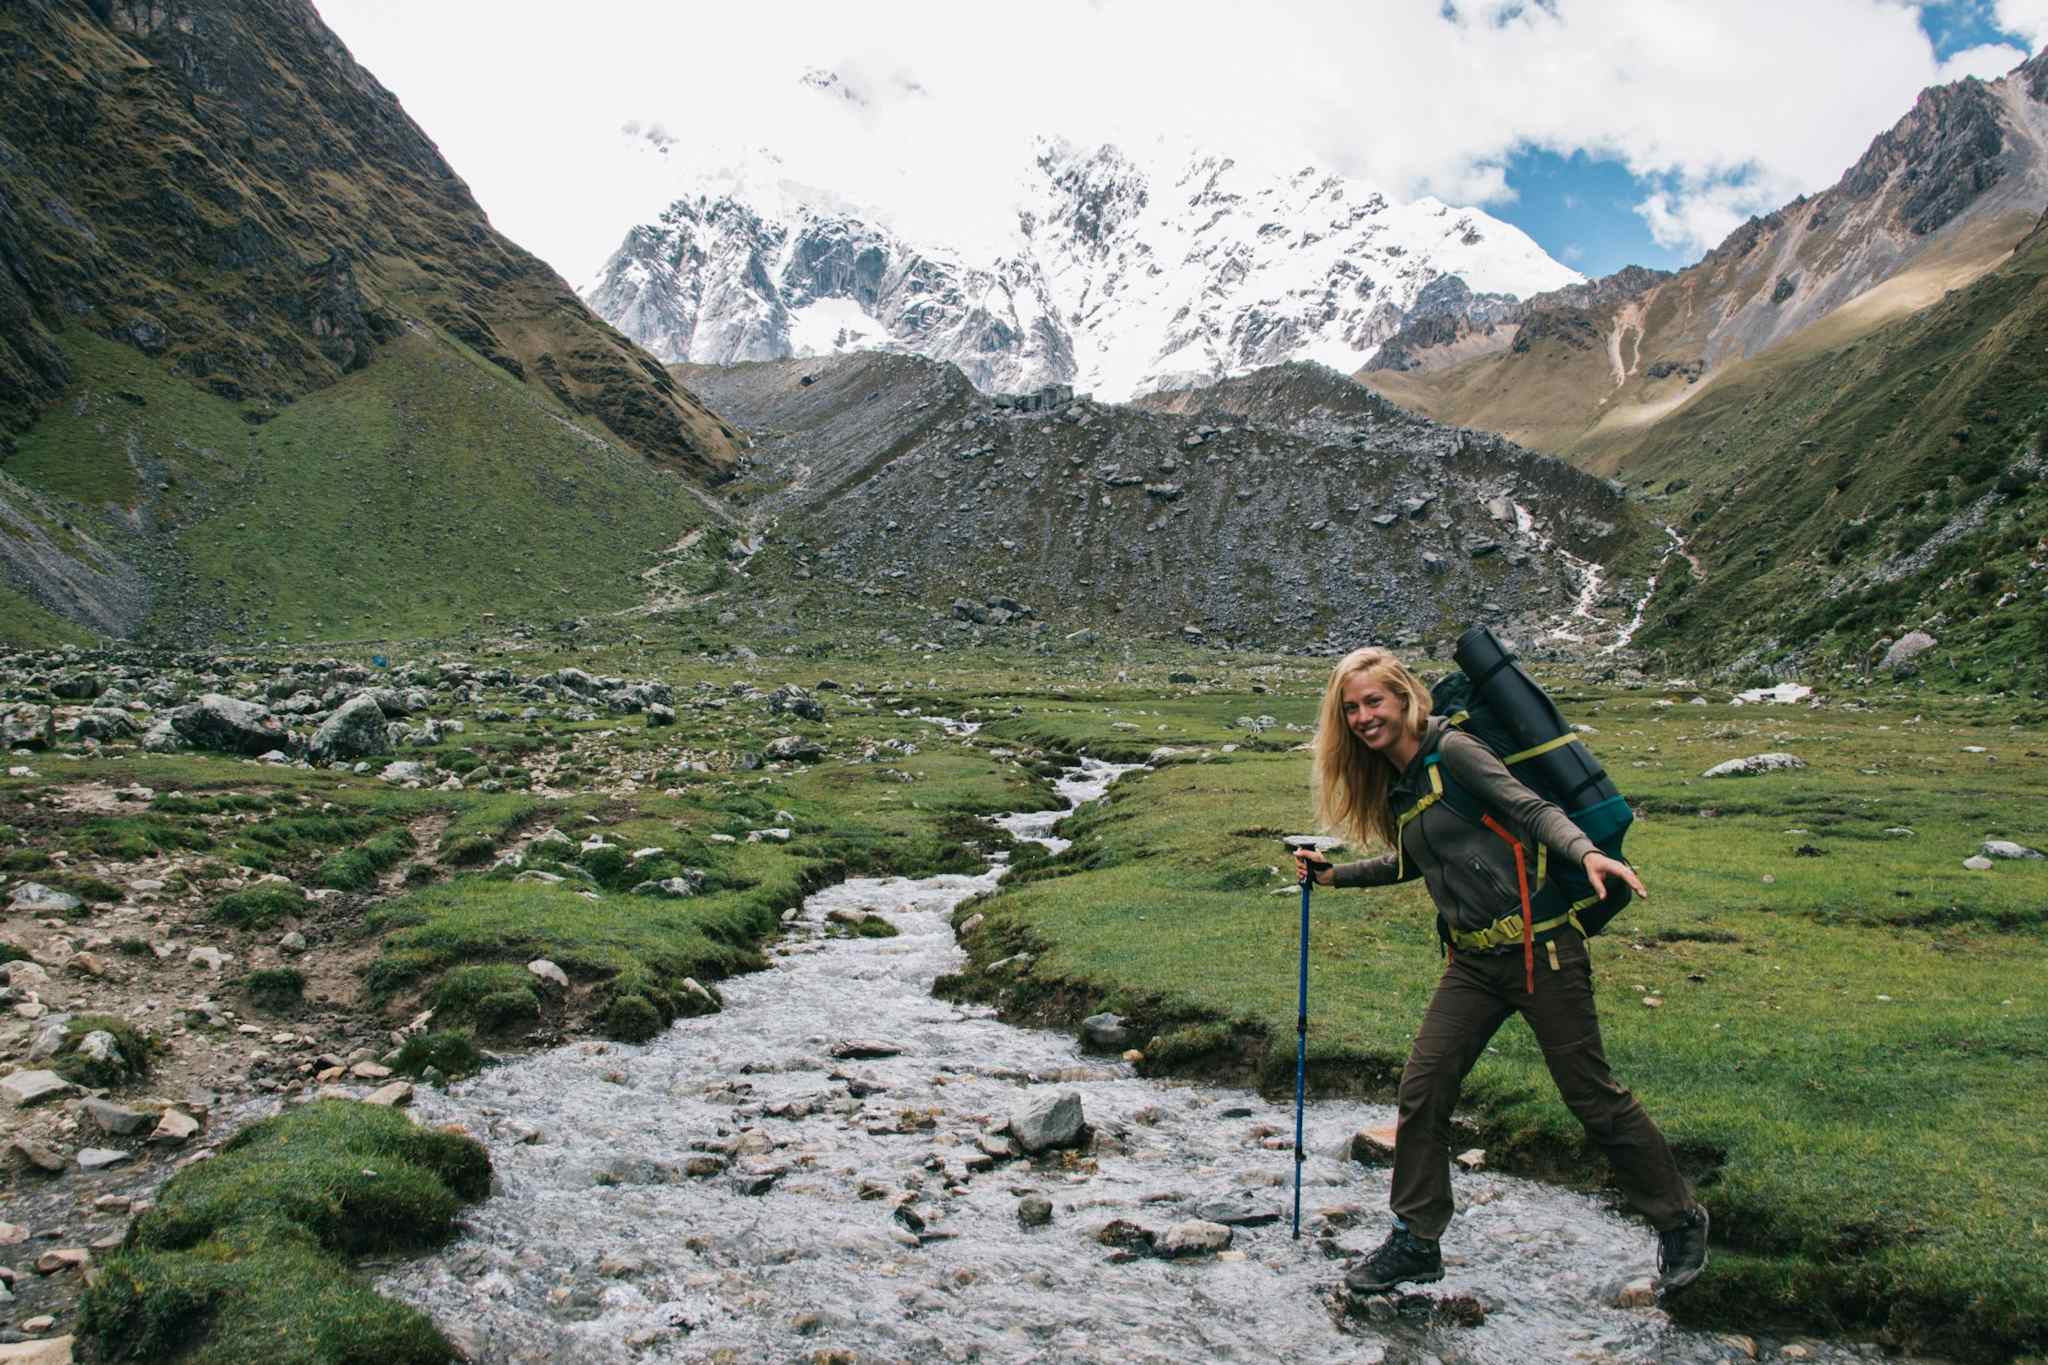 Women crossing a river on the Salkantay Trek in Peru with snow-covered mountains in the background